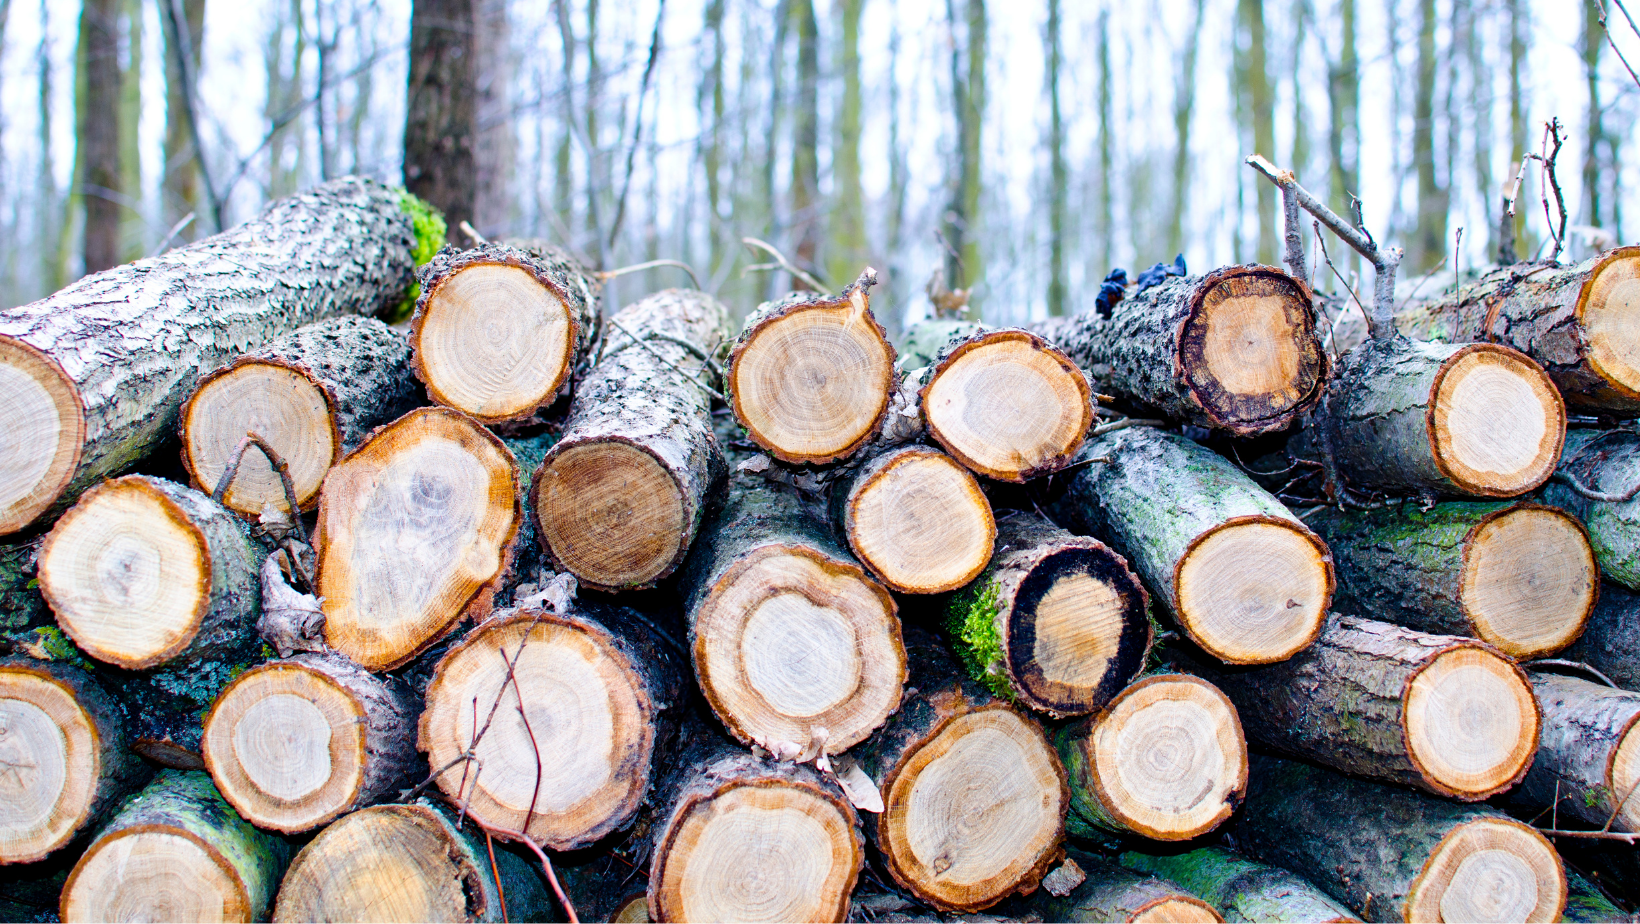 Wood Innovation Funding & Agroforestry Grant Opportunities